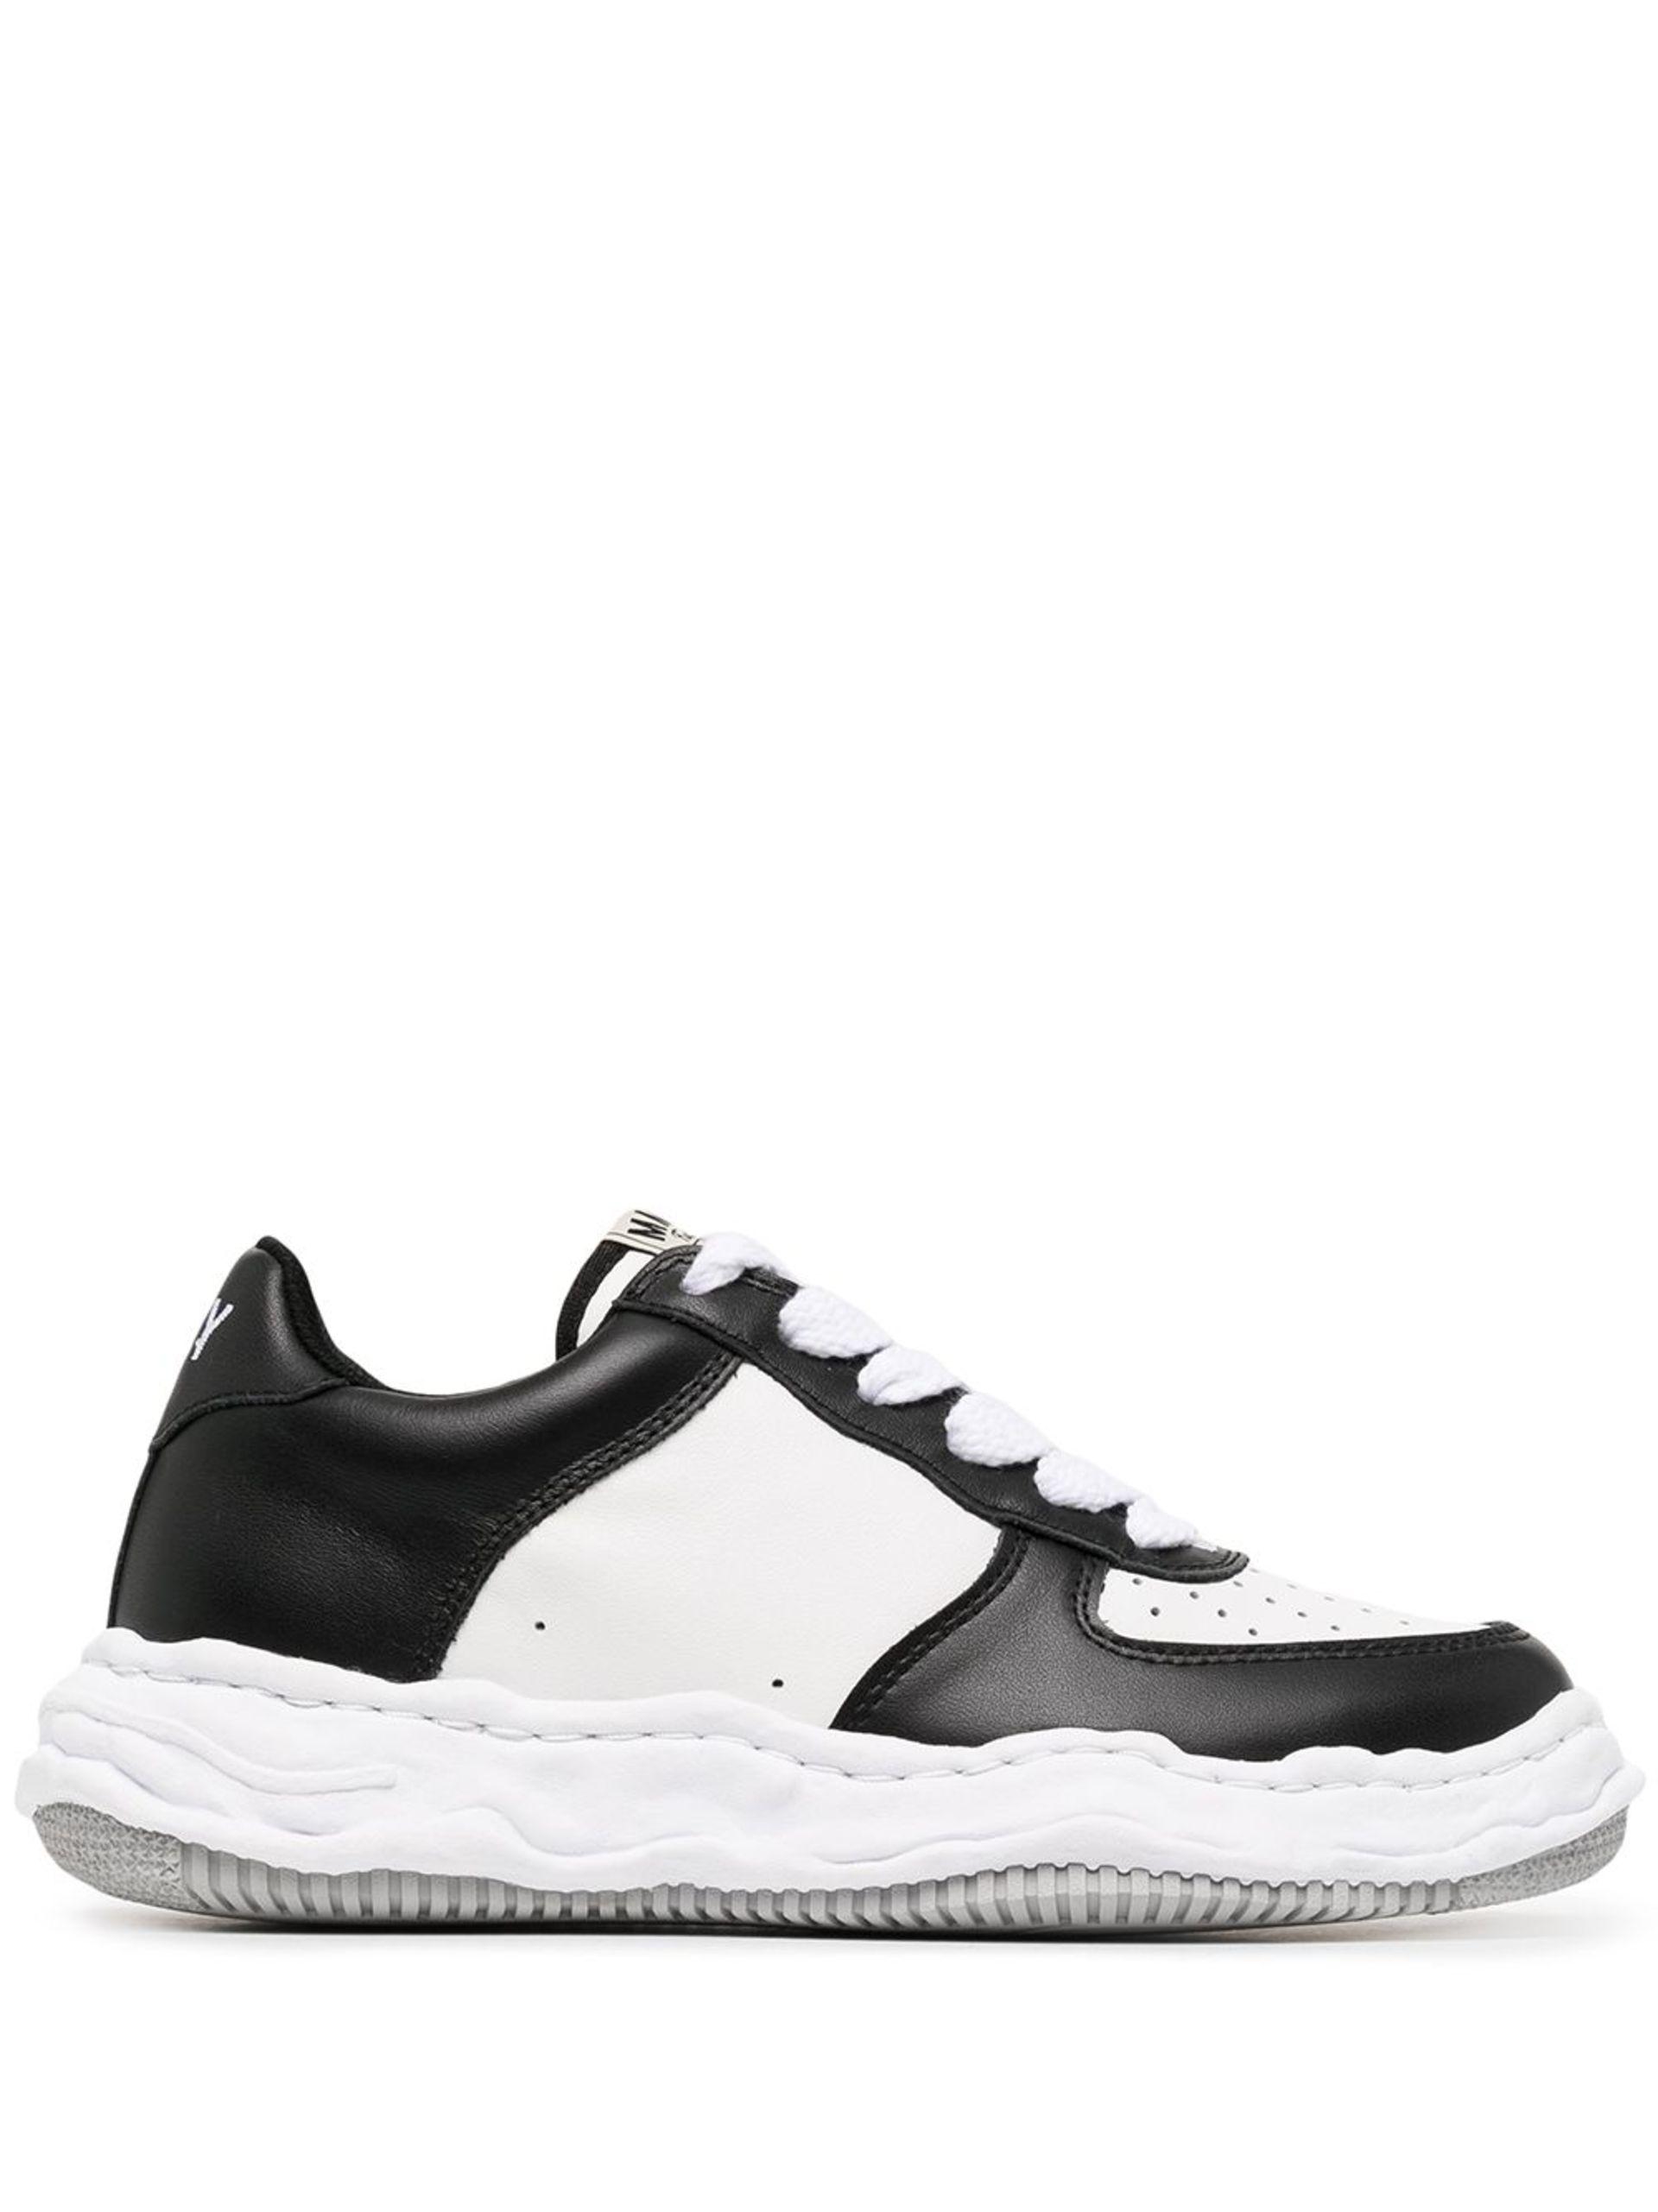 Men's Black White Patent Leather detailing Mid Top Sneakers By Brune 